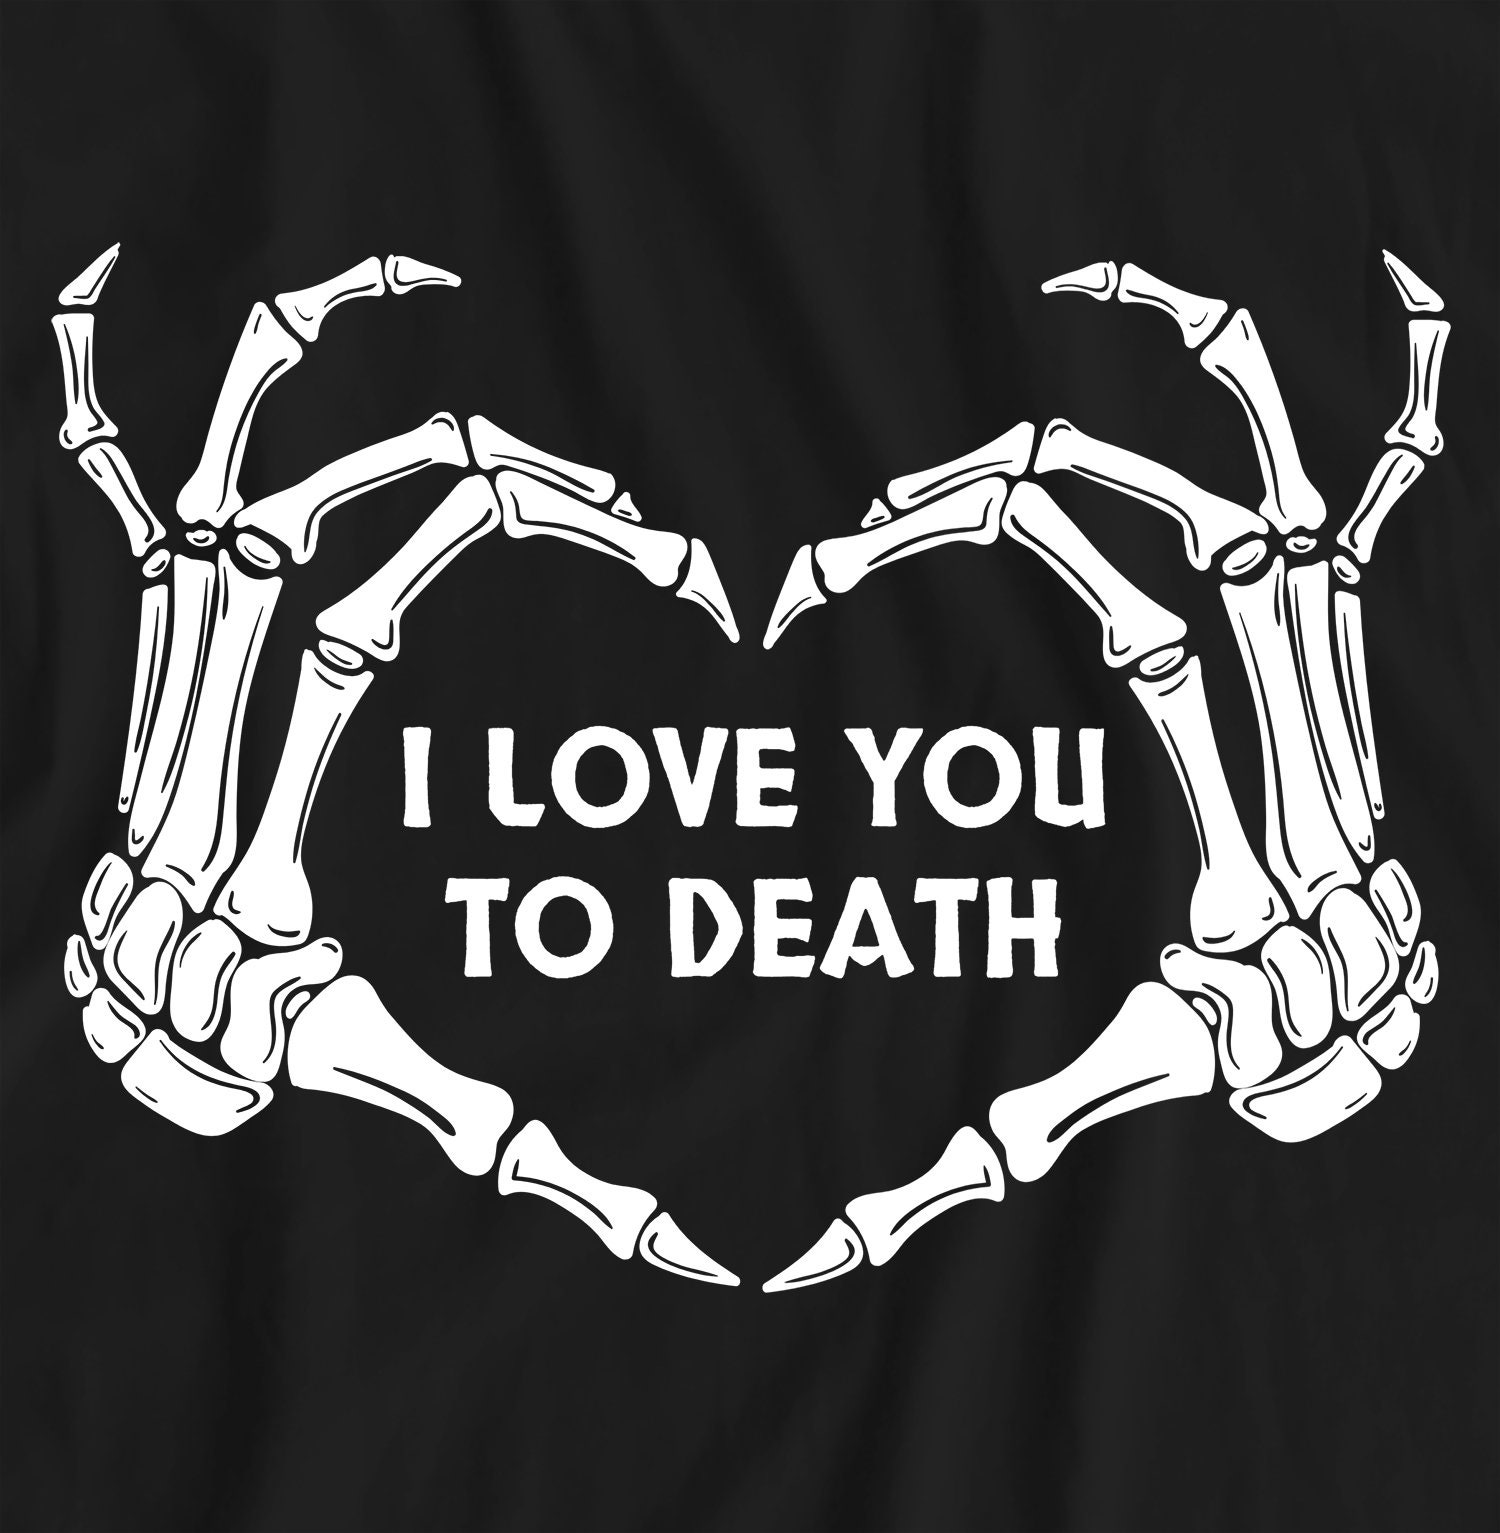 Discover I Love you to death Shirt, Aesthetic Clothing, Gothic Apparel, Goth Top, Death Metal T-shirt, Heavy Metal Tee, Black Metal Tshirt, Halloween